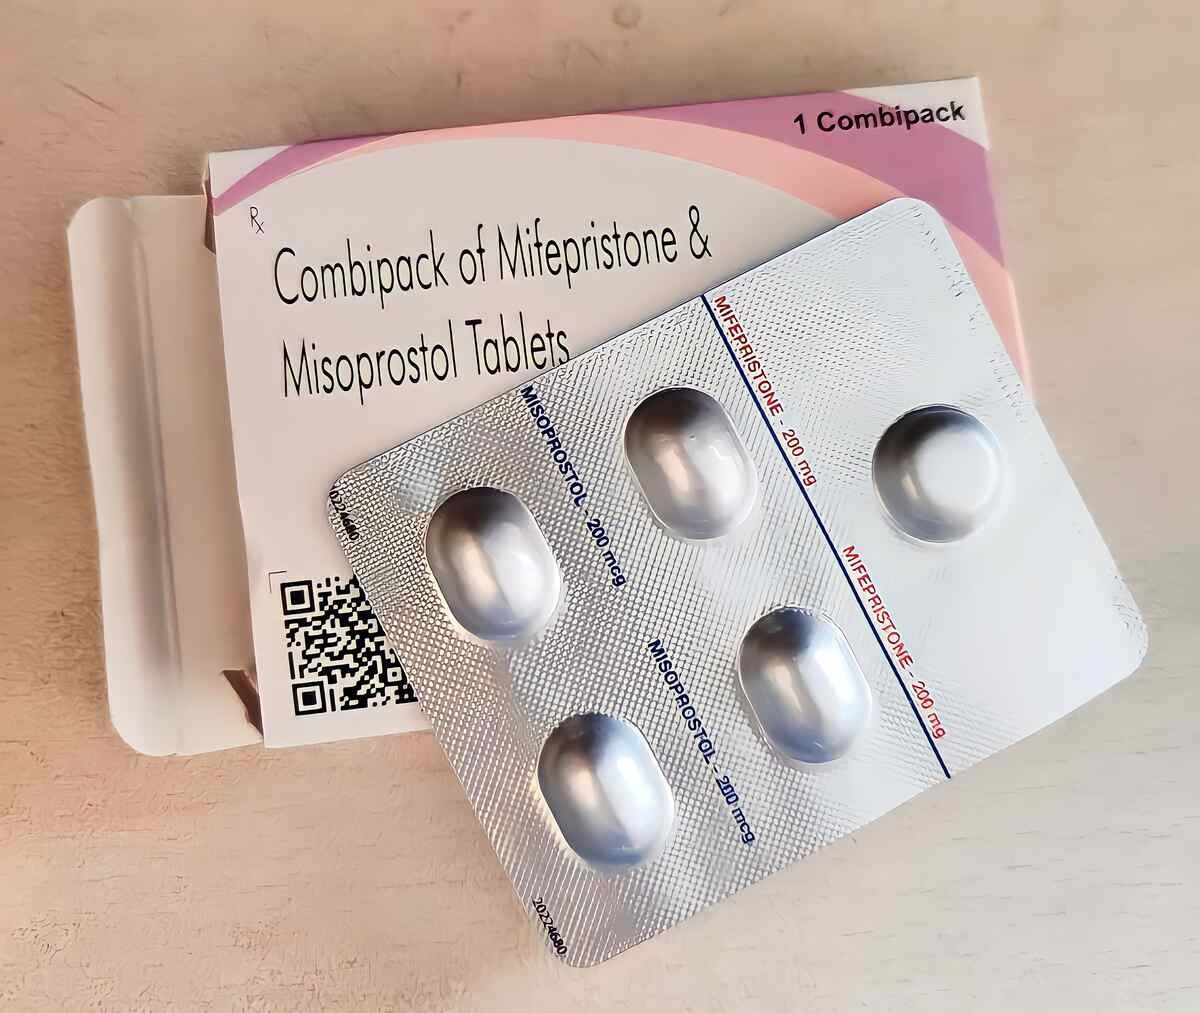 How much does the abortion pill cost?